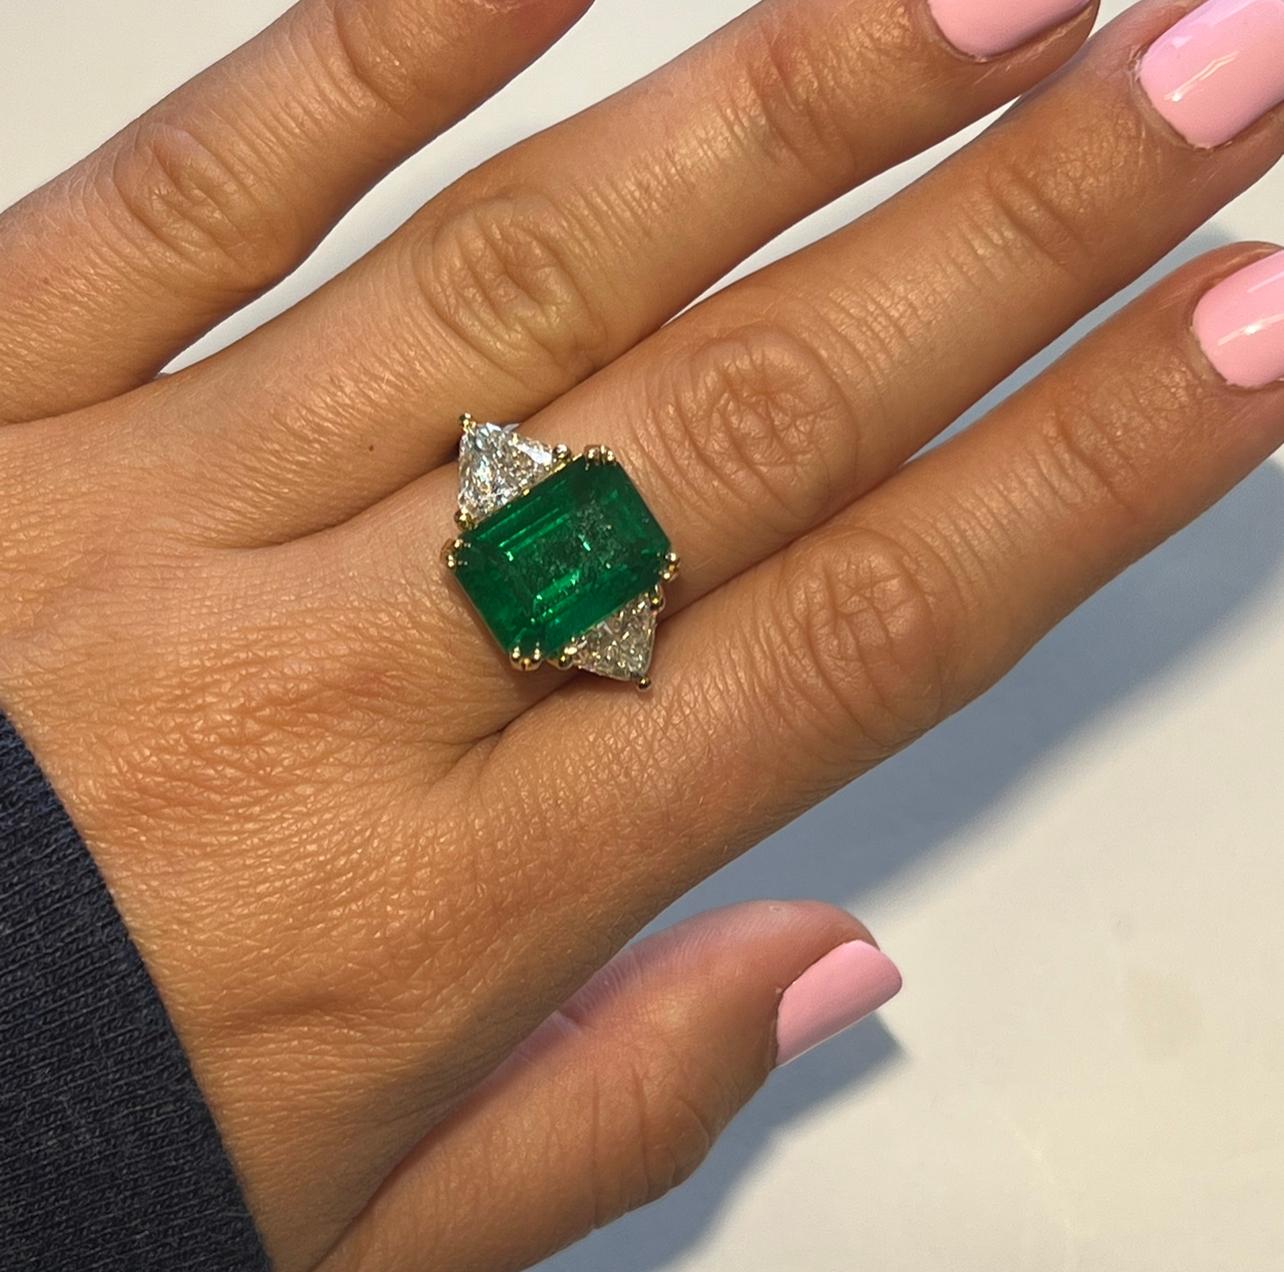 9.72 carats natural Earth Mined Emerald 
Emerald comes with GIA CERT
Emerald measures 13.92 X 10.46 X 8.66mm
1.86 Carats sI1 HI color natural earth mined Trillion Cut diamonds Flanking Center Emerald 
18k Yellow Gold
Made in the USA in Miami,